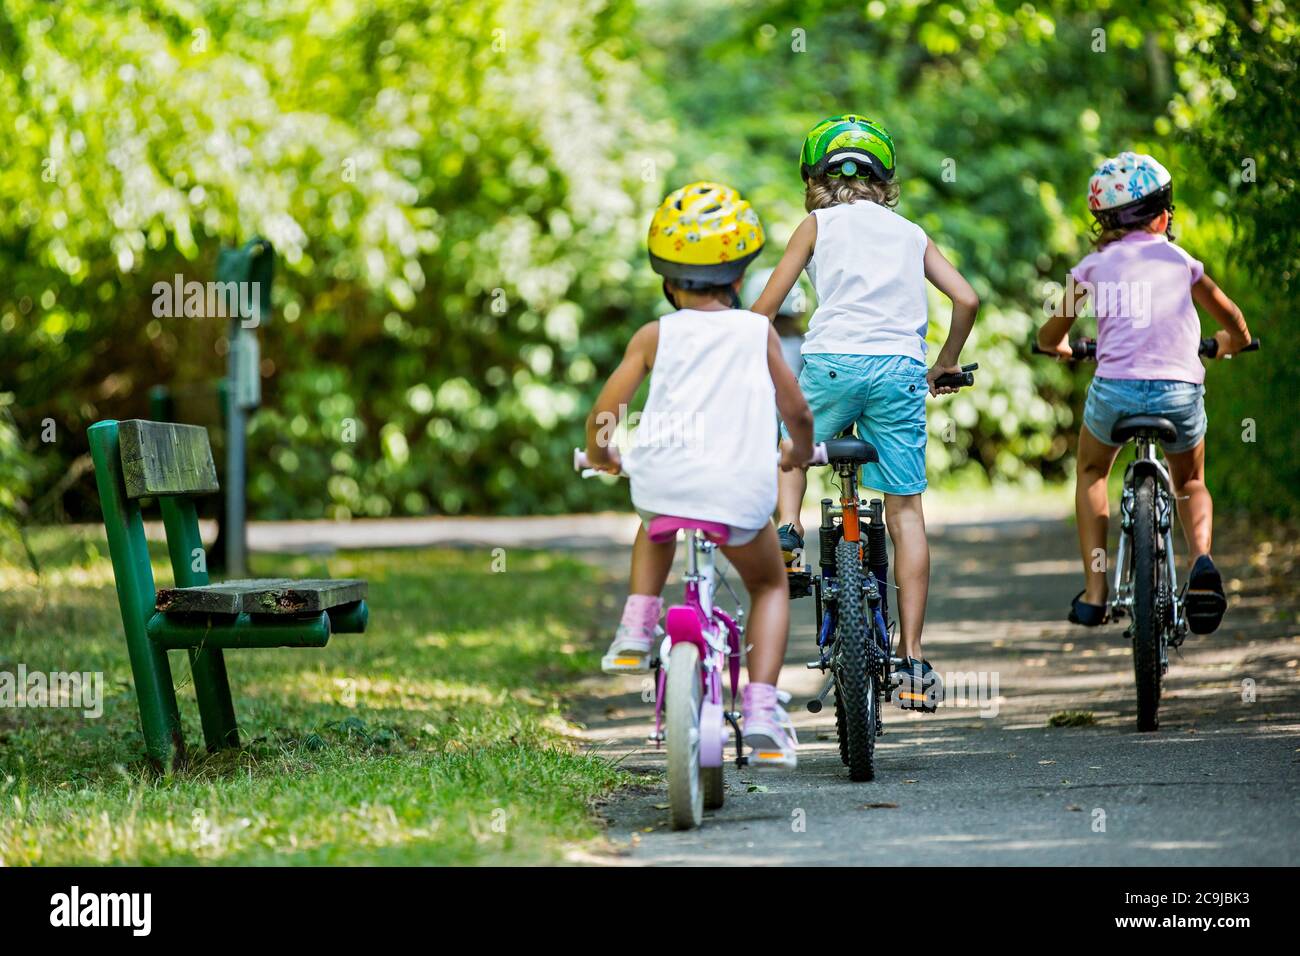 Children wearing helmeta and cycling in park. Stock Photo